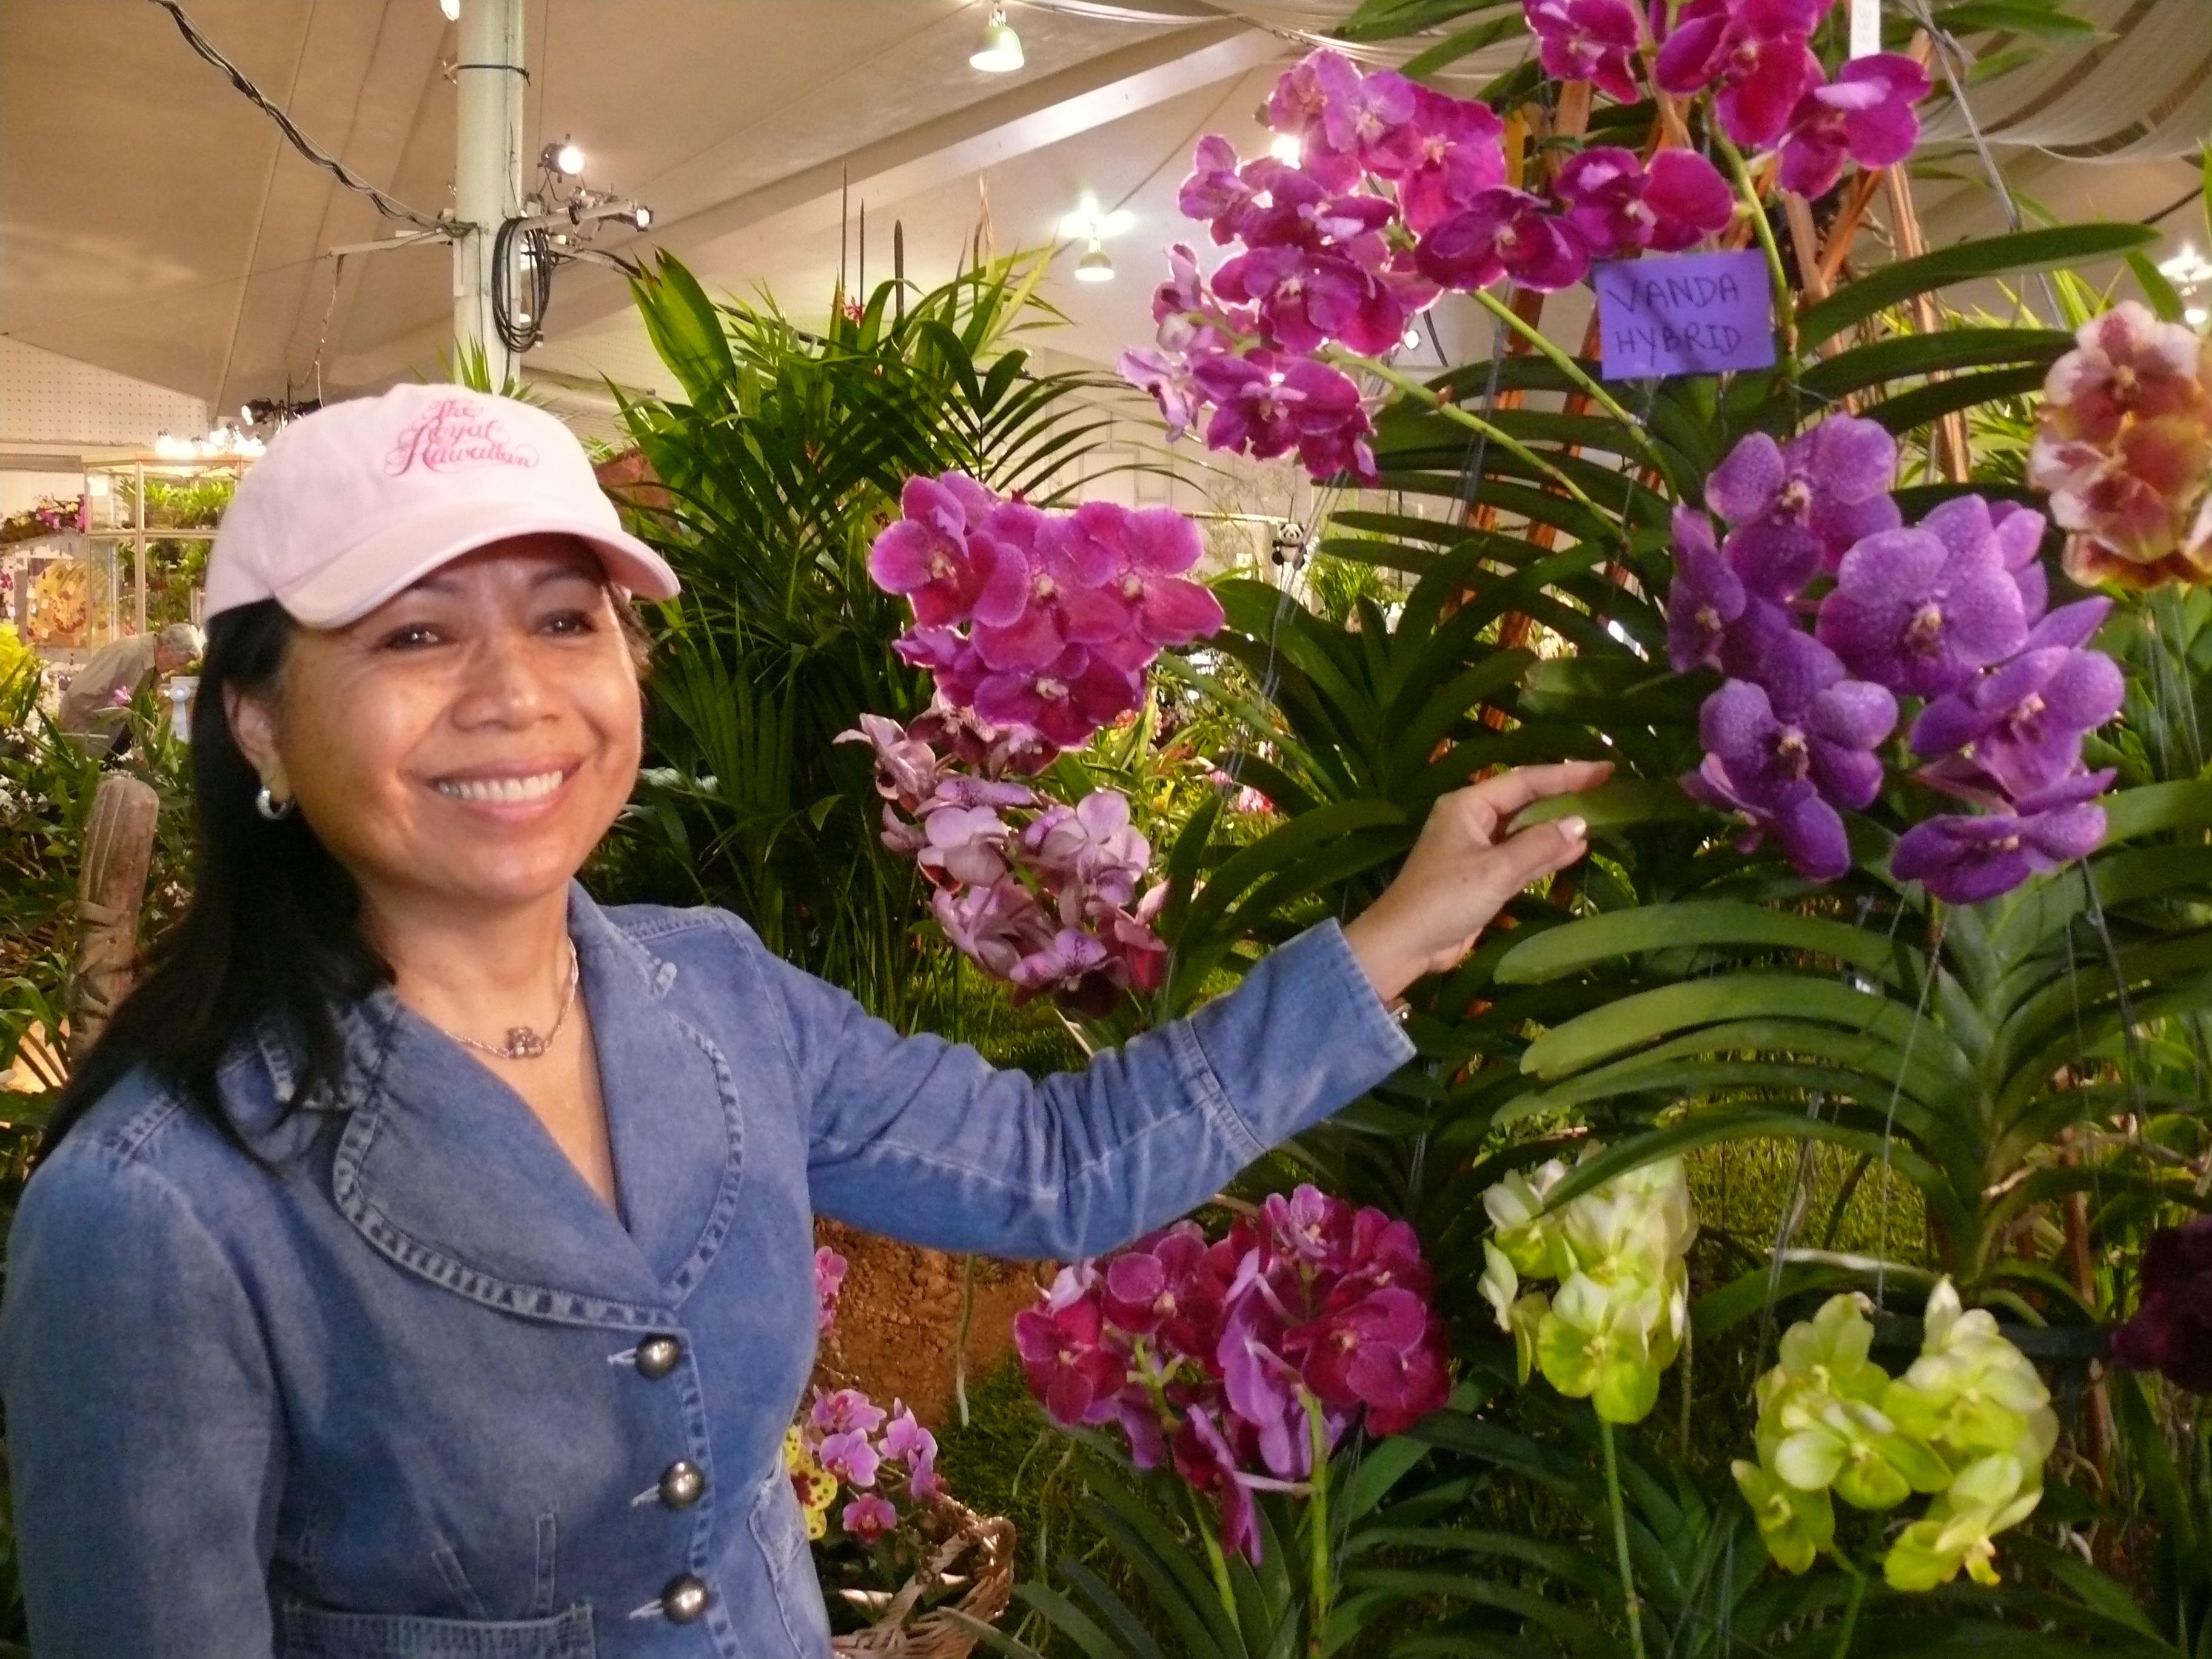 WORA AND ORCHIDS, FAVORITE HOBBY